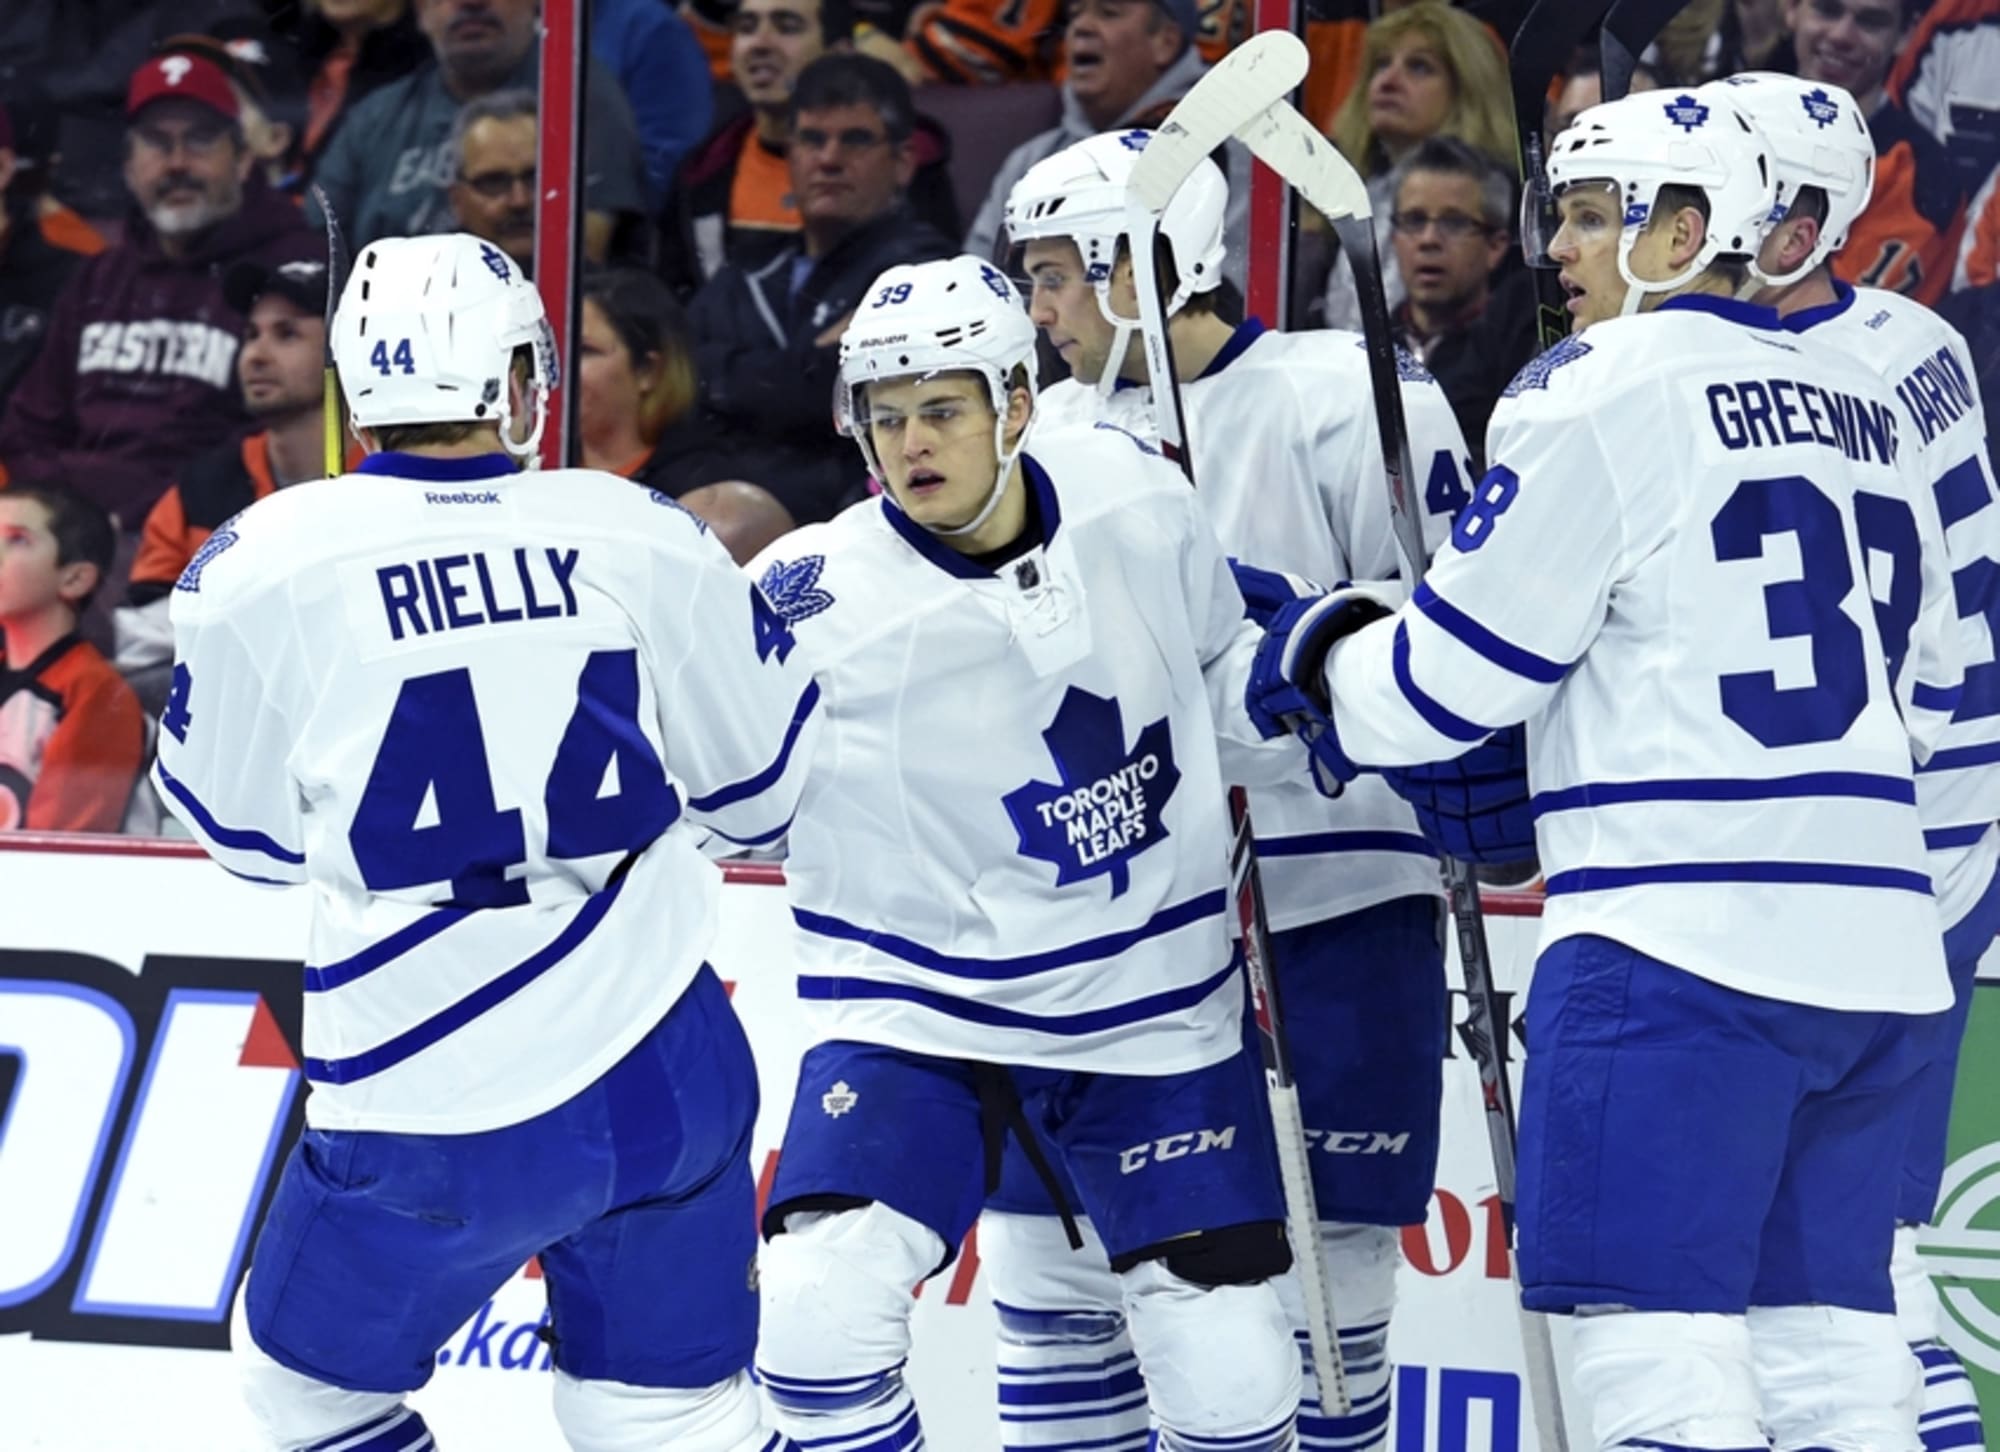 Where in the NHL standings will the Leafs finish this season?